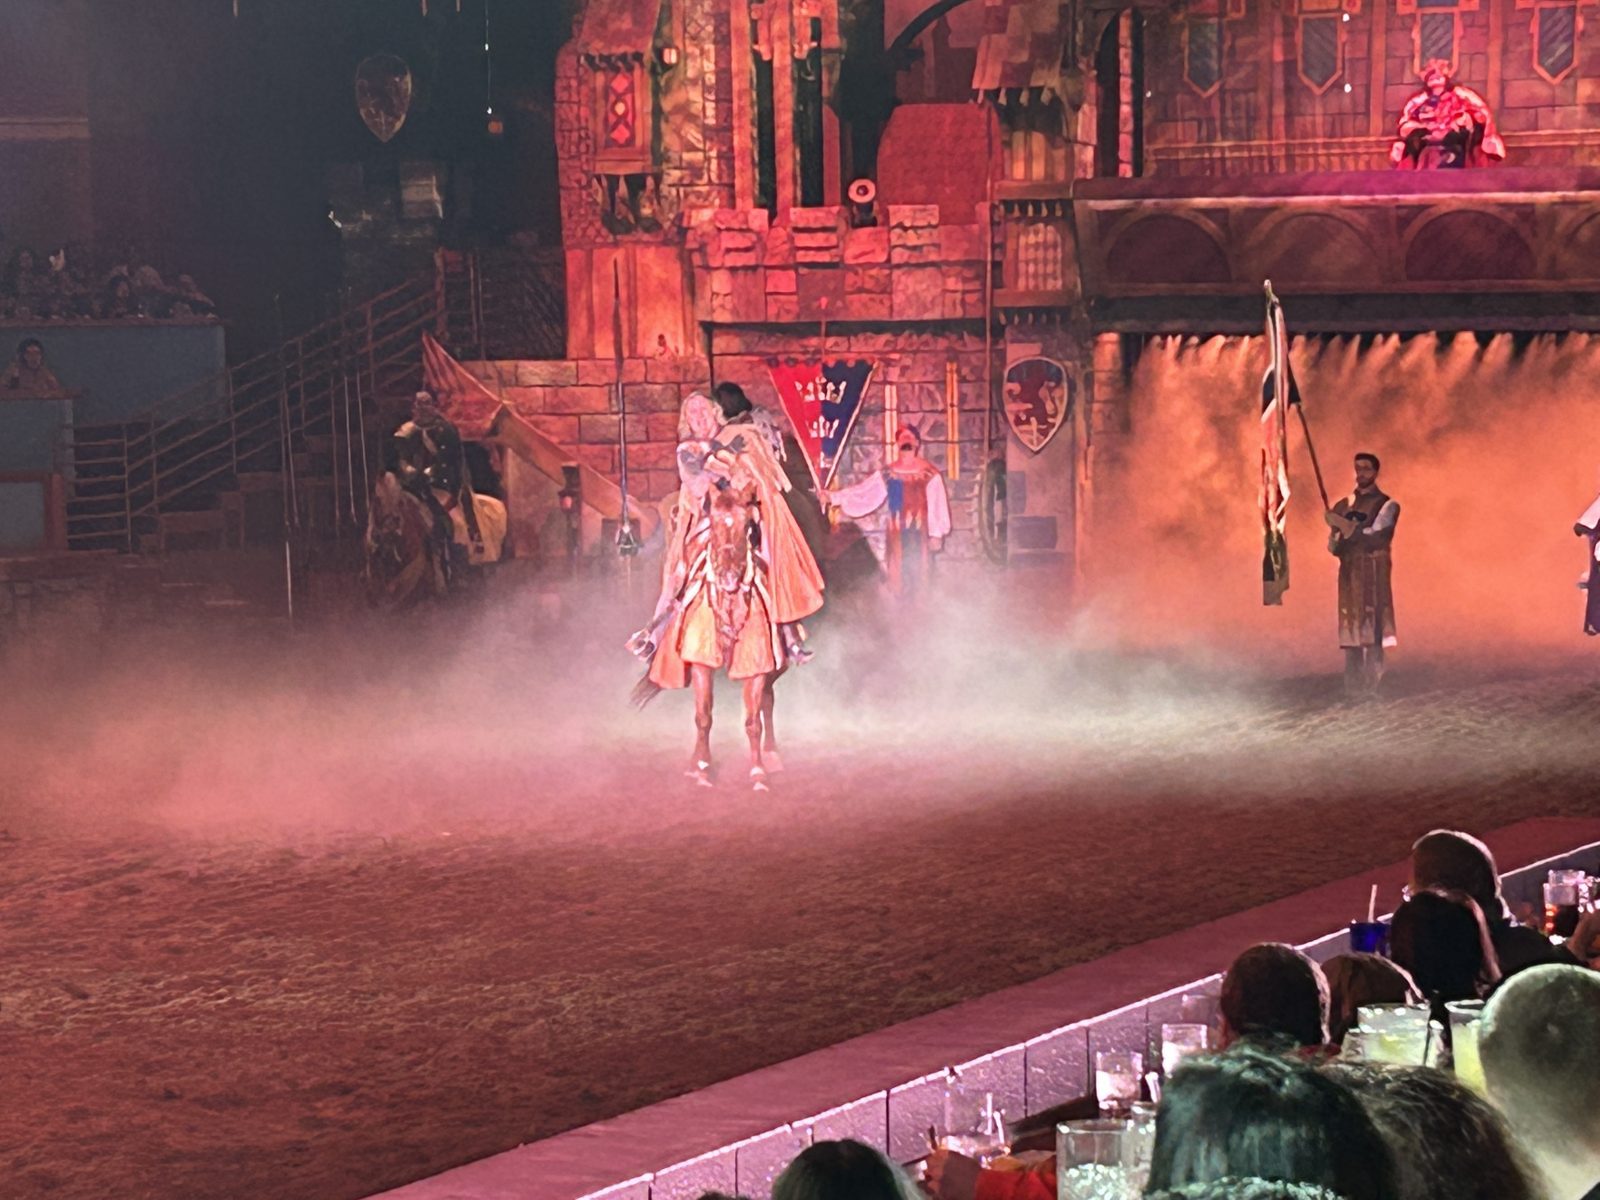 Tournament of Kings Dinner and Show at the Excalibur Hotel and Casino, Las  Vegas - Evendo